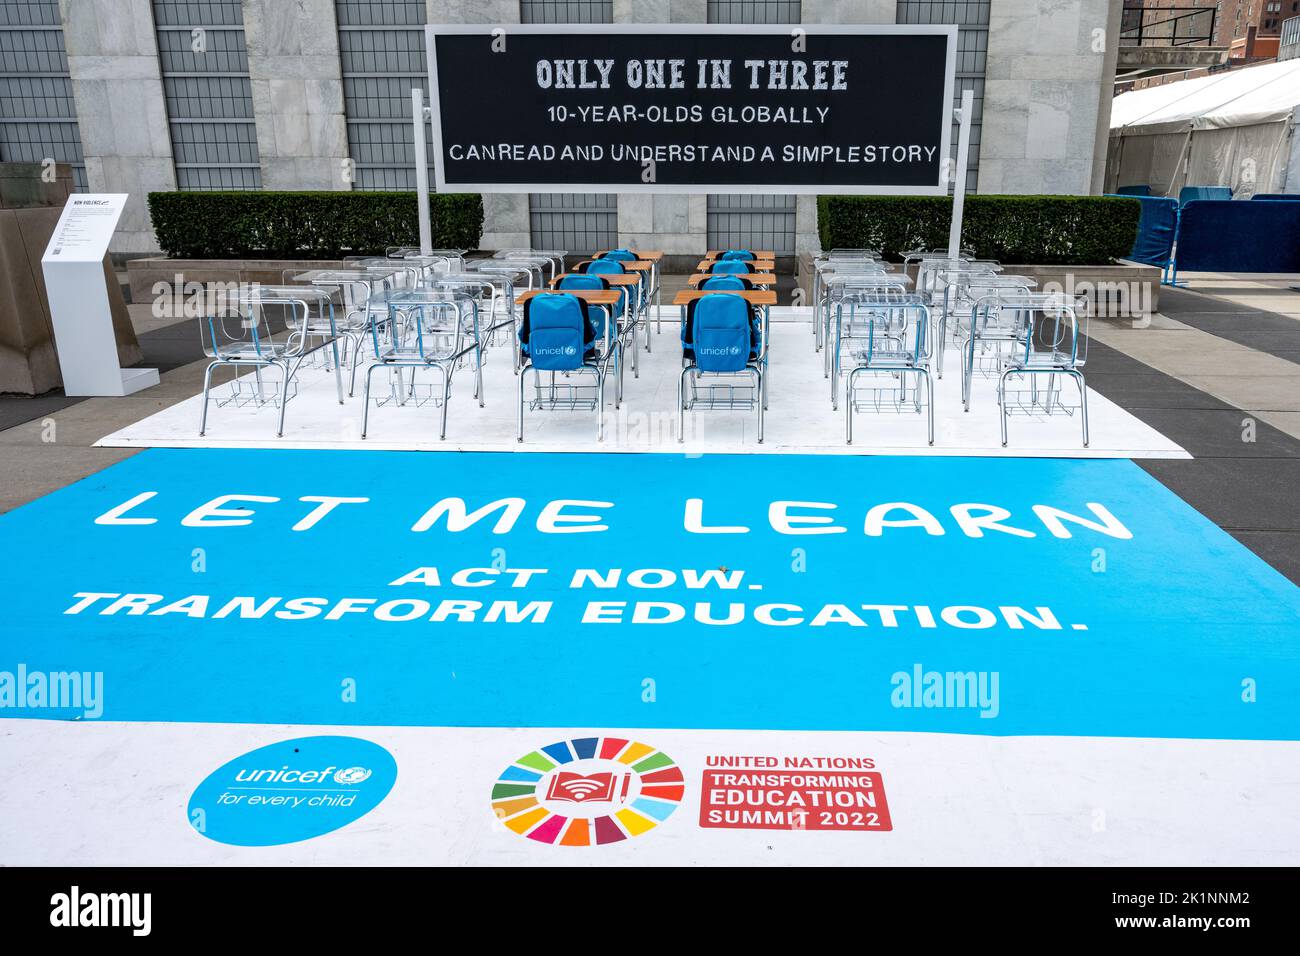 New York, USA. 19th Sep, 2022. An installation representing a UN Children's Fund (UNICEF) classroom with a dramatic statement in the blackboard was placed outside the entrance of the United Nations main building during the Transforming Education Summit, ahead of the start of the United Nations Annual General Assembly. Credit: Enrique Shore/Alamy Live News Stock Photo